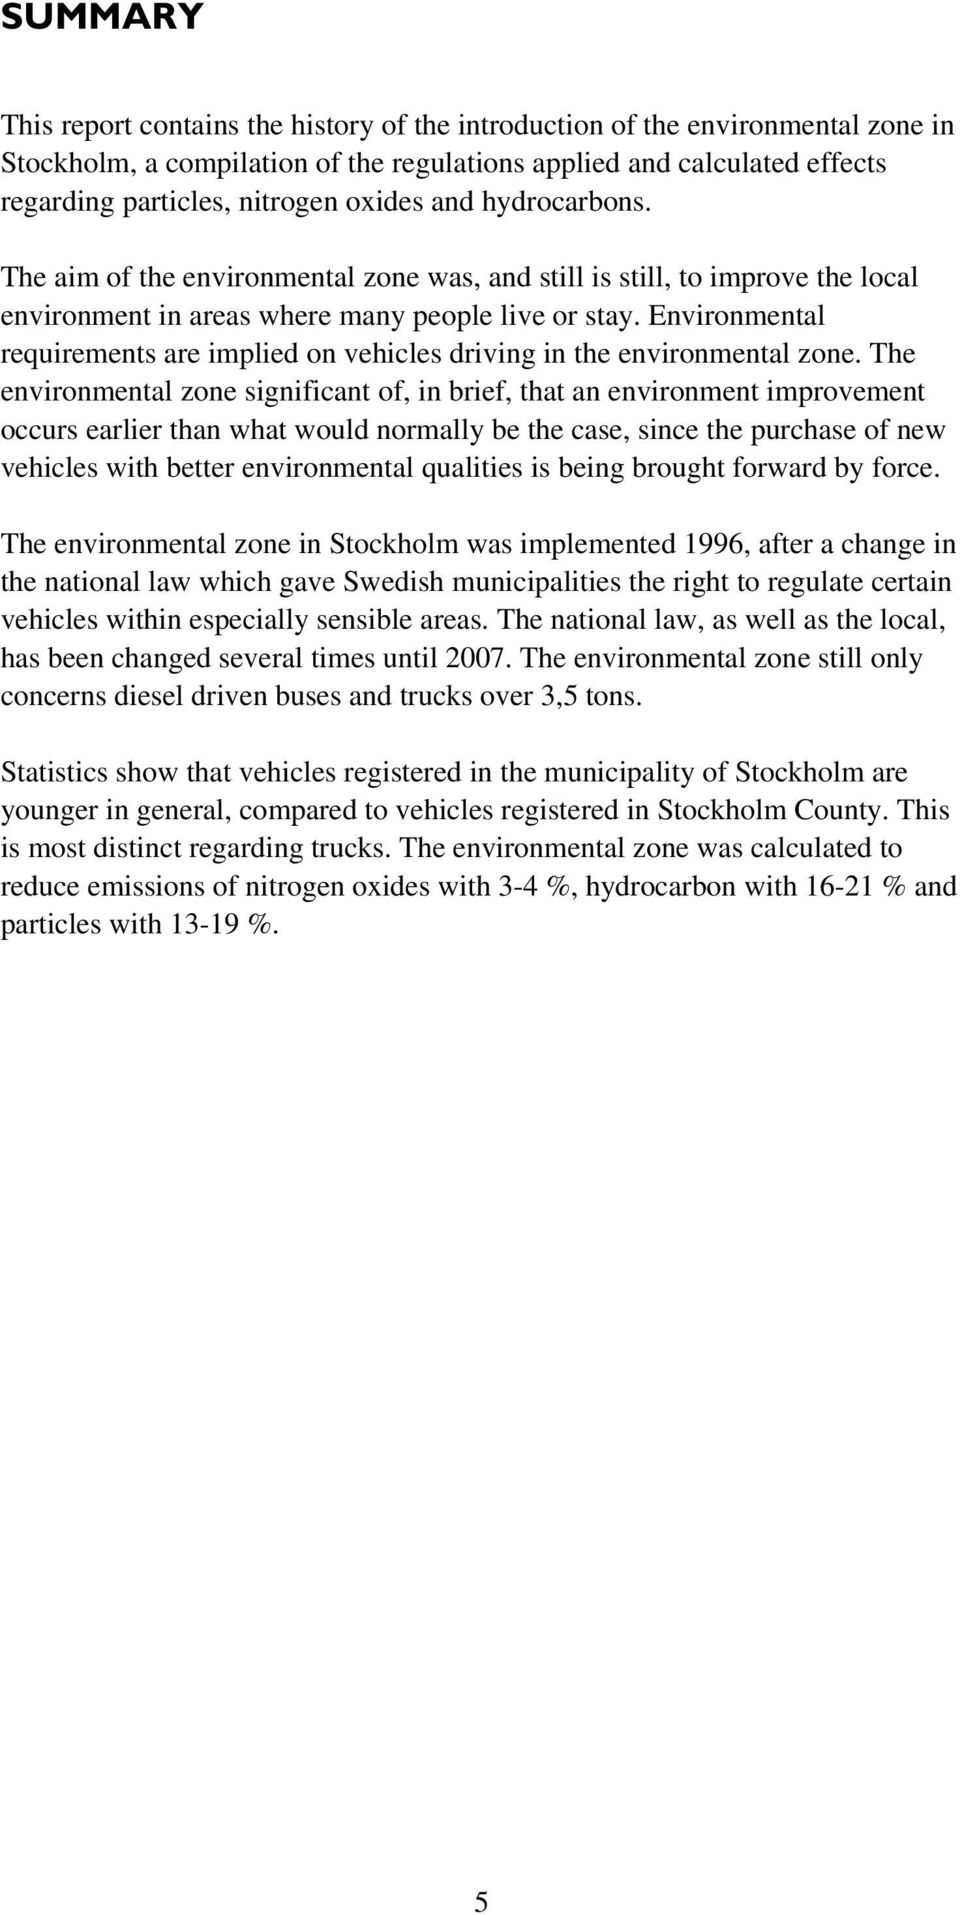 Environmental requirements are implied on vehicles driving in the environmental zone.